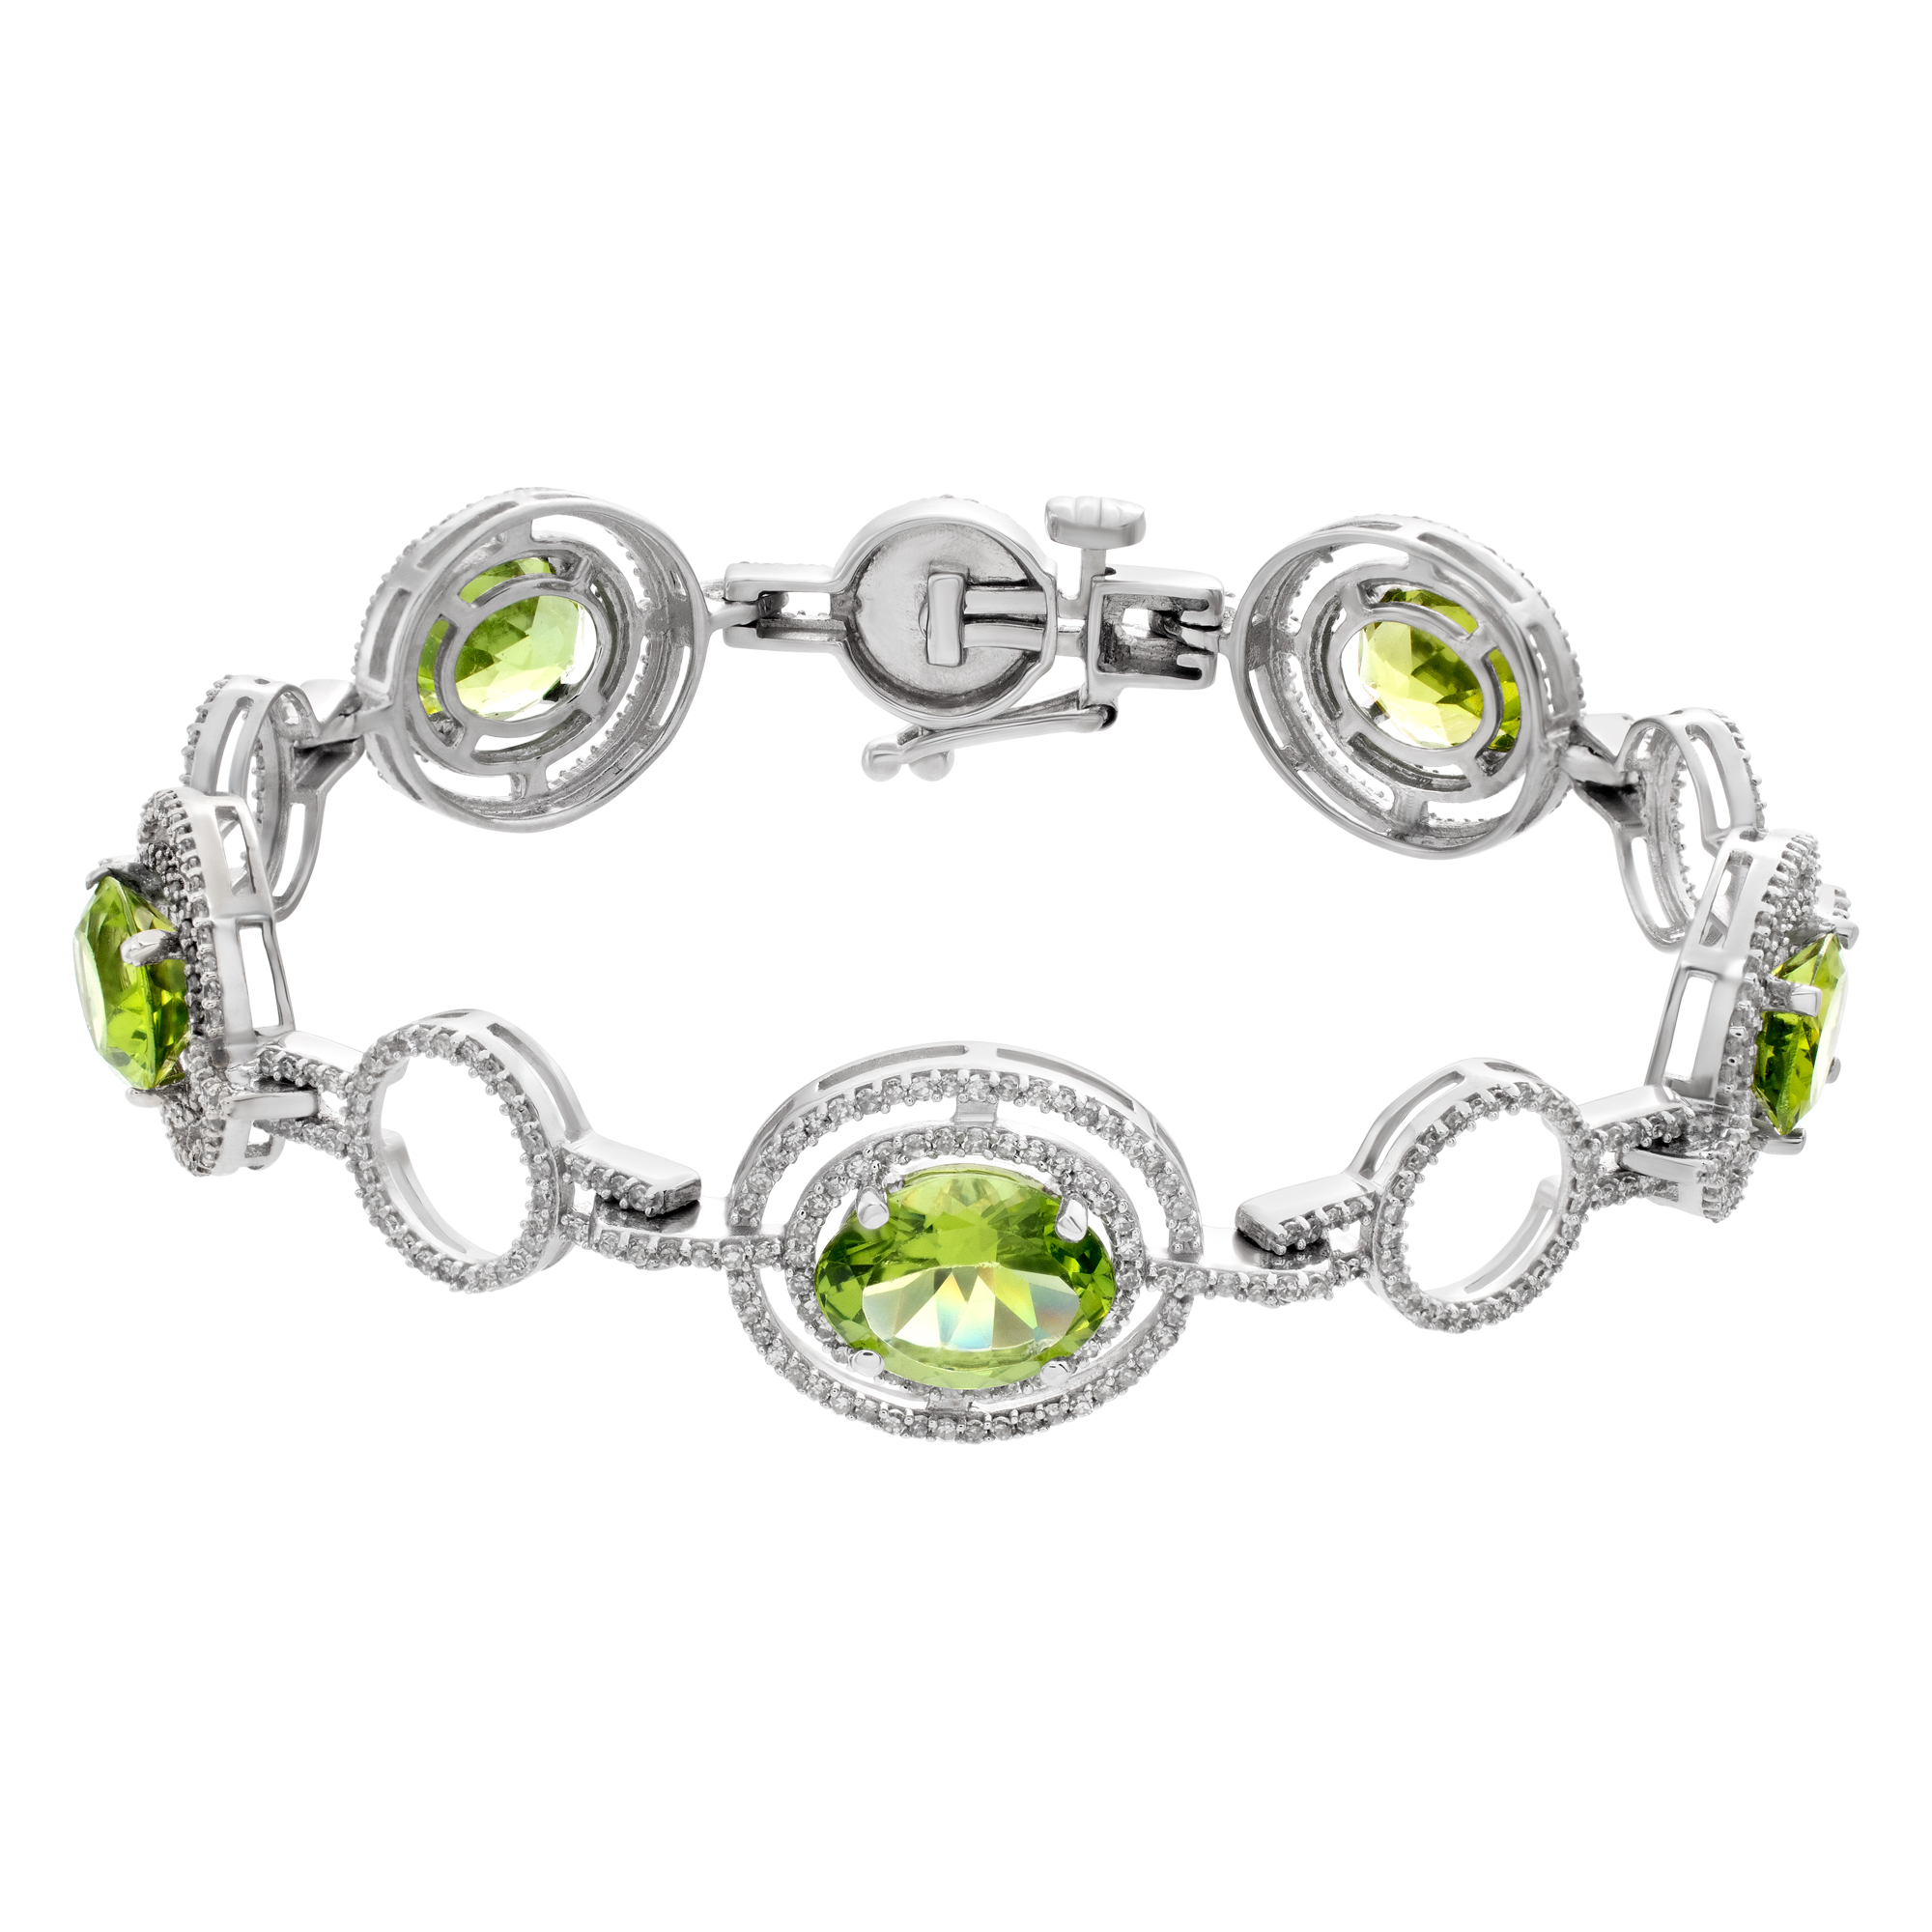 Peridot and diamond bracelet in 14k white gold. Oval brilliant cut Peridot total approx weight: 11.00 carats. Round brilliant cut diamonds total approx. weight over 2.20 carats